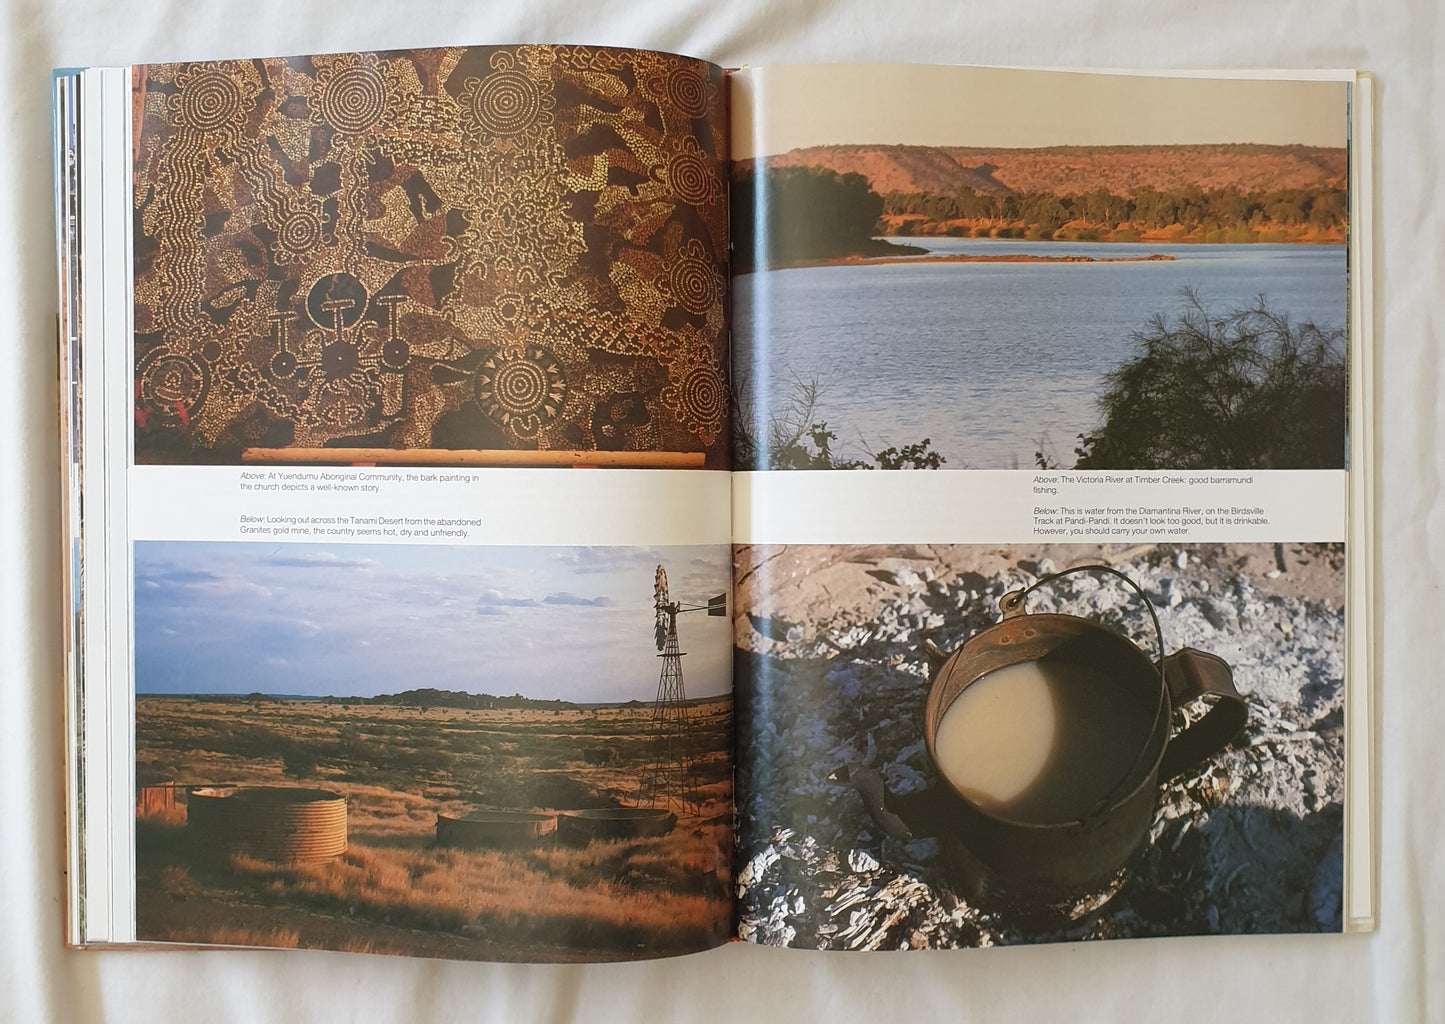 Explore Australia’s Great Inland  by Bill Andrews